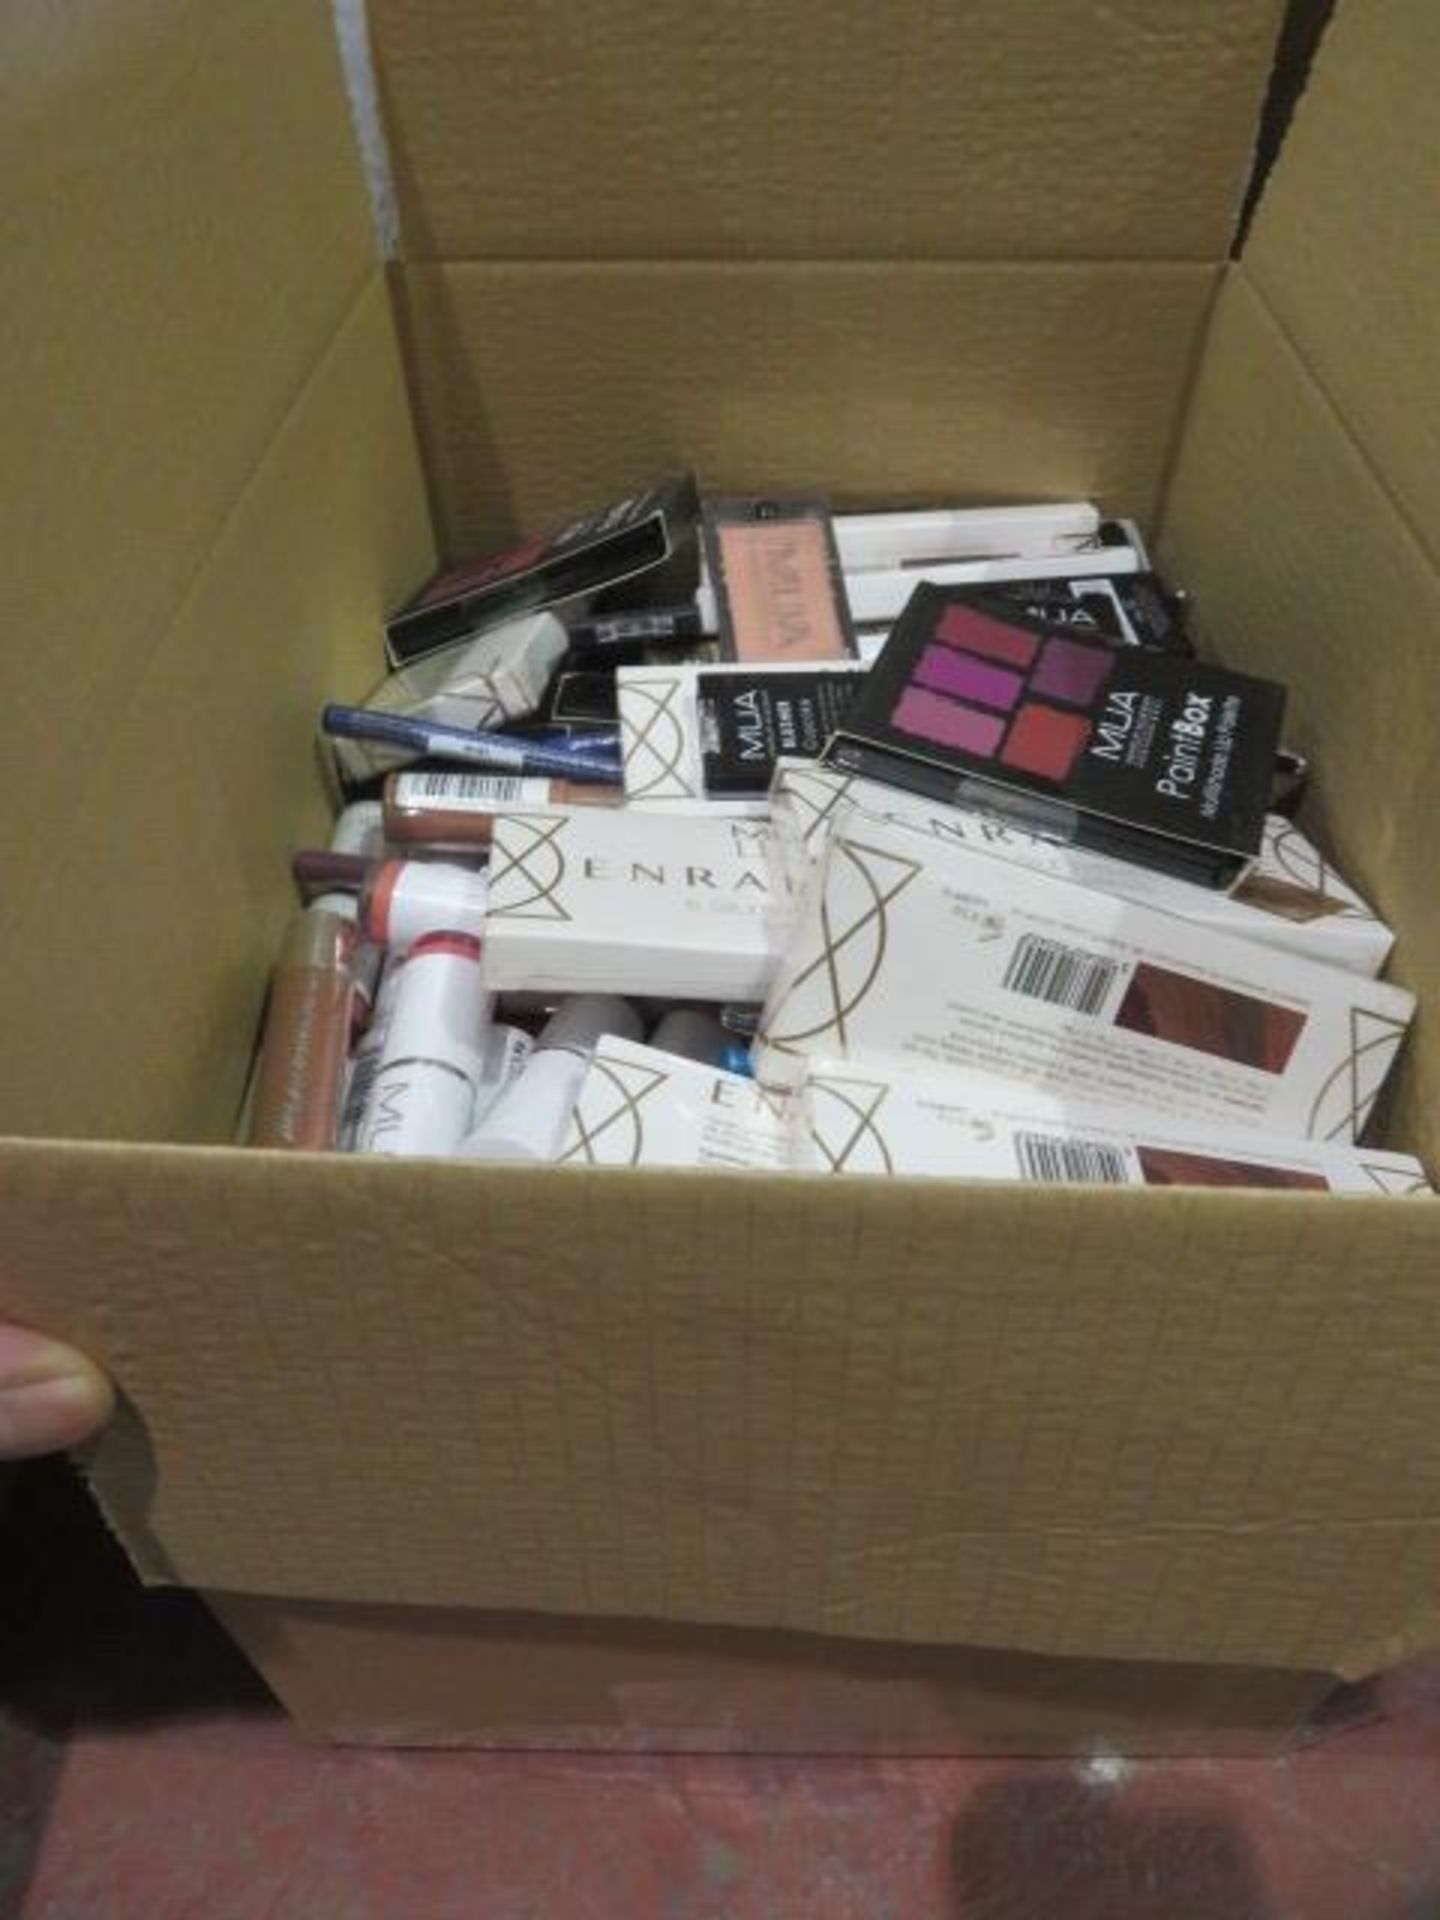 Circa. 200 items of various new make up acadamy make up to include: lipstick, enchanted 5 silk ... - Image 2 of 2